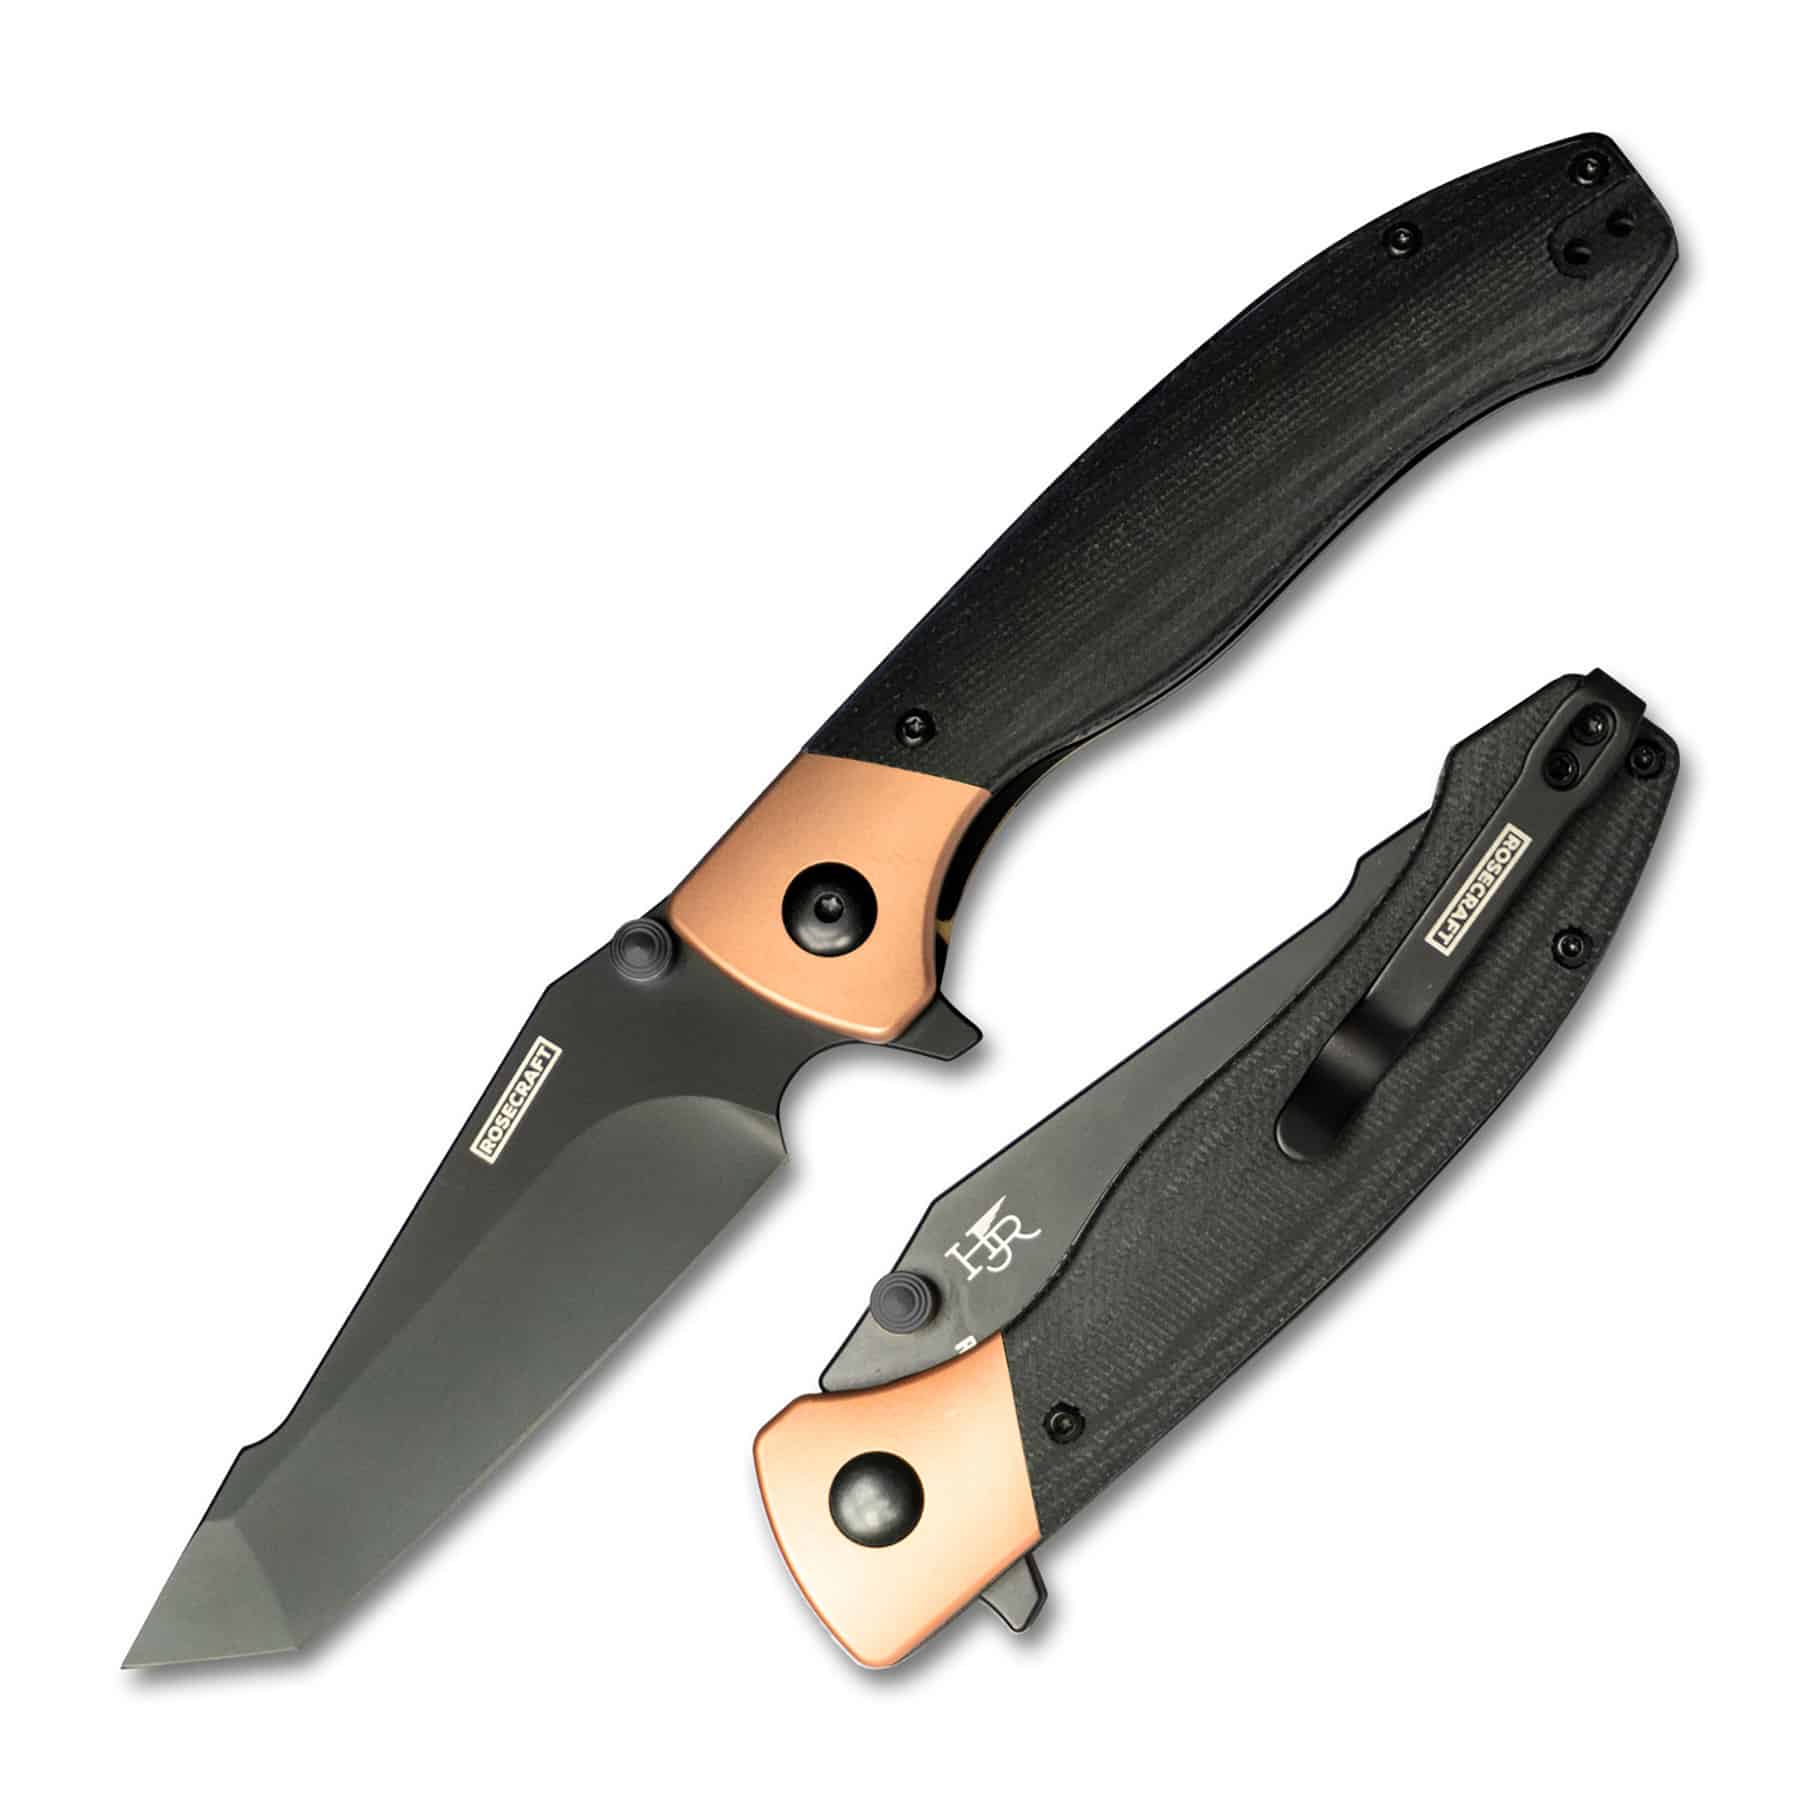 The Rosecraft Aeris Rex is a tactical folder with a gentleman's carry aesthetic. 